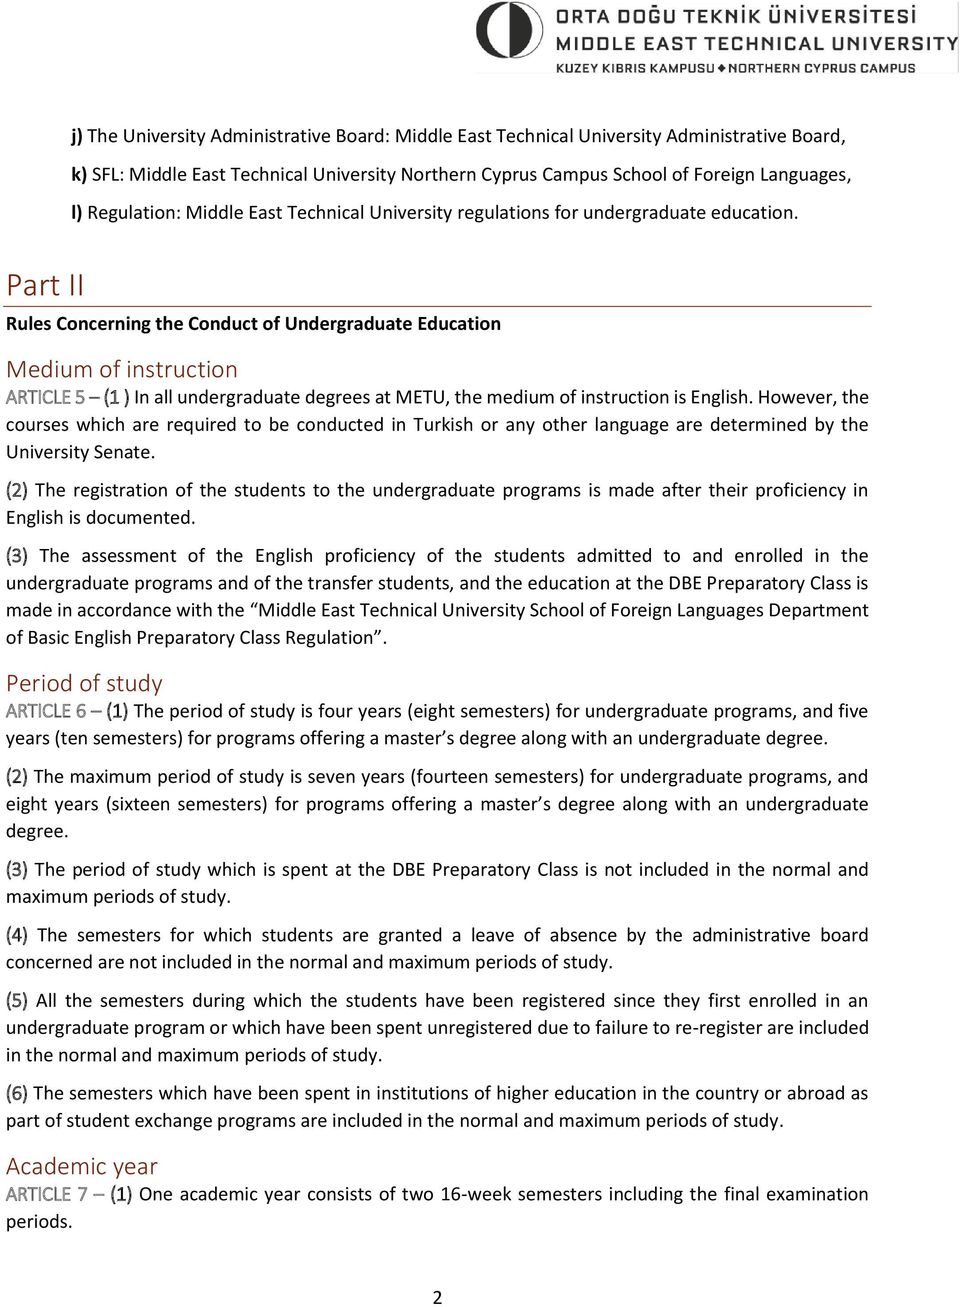 Part II Rules Concerning the Conduct of Undergraduate Education Medium of instruction ARTICLE 5 (1 ) In all undergraduate degrees at METU, the medium of instruction is English.